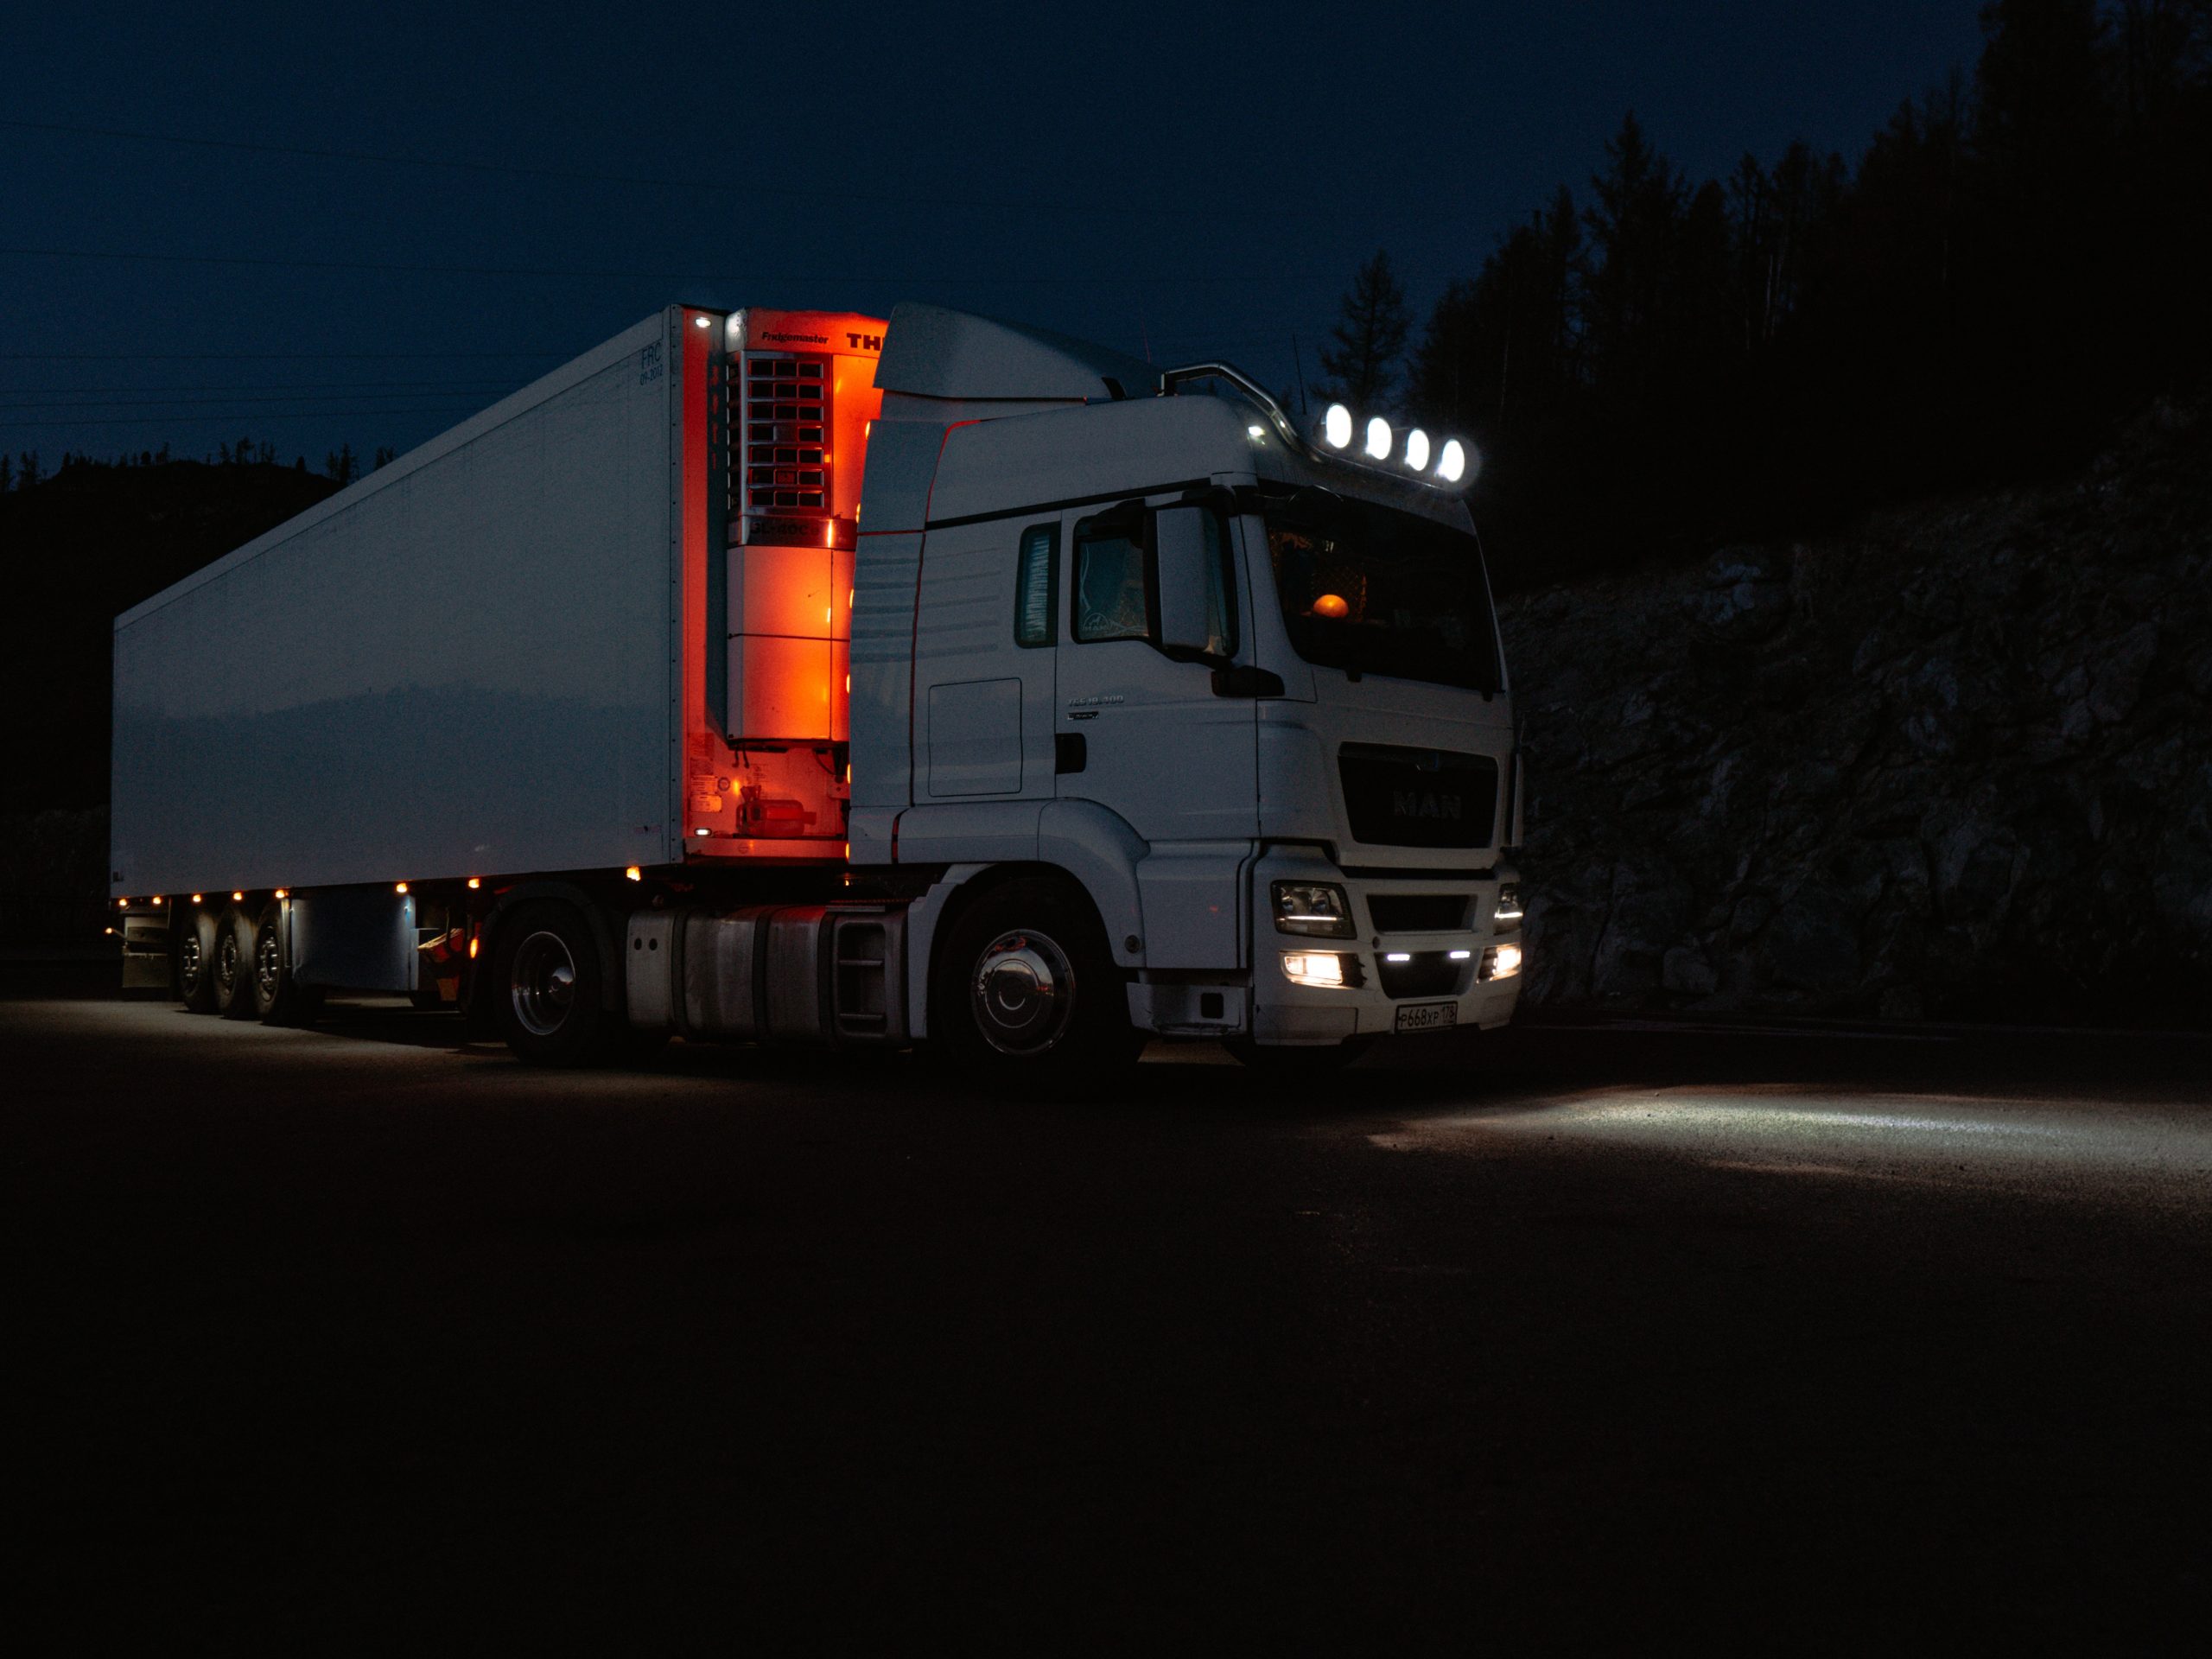 Tractor-trailer driving down the road at night